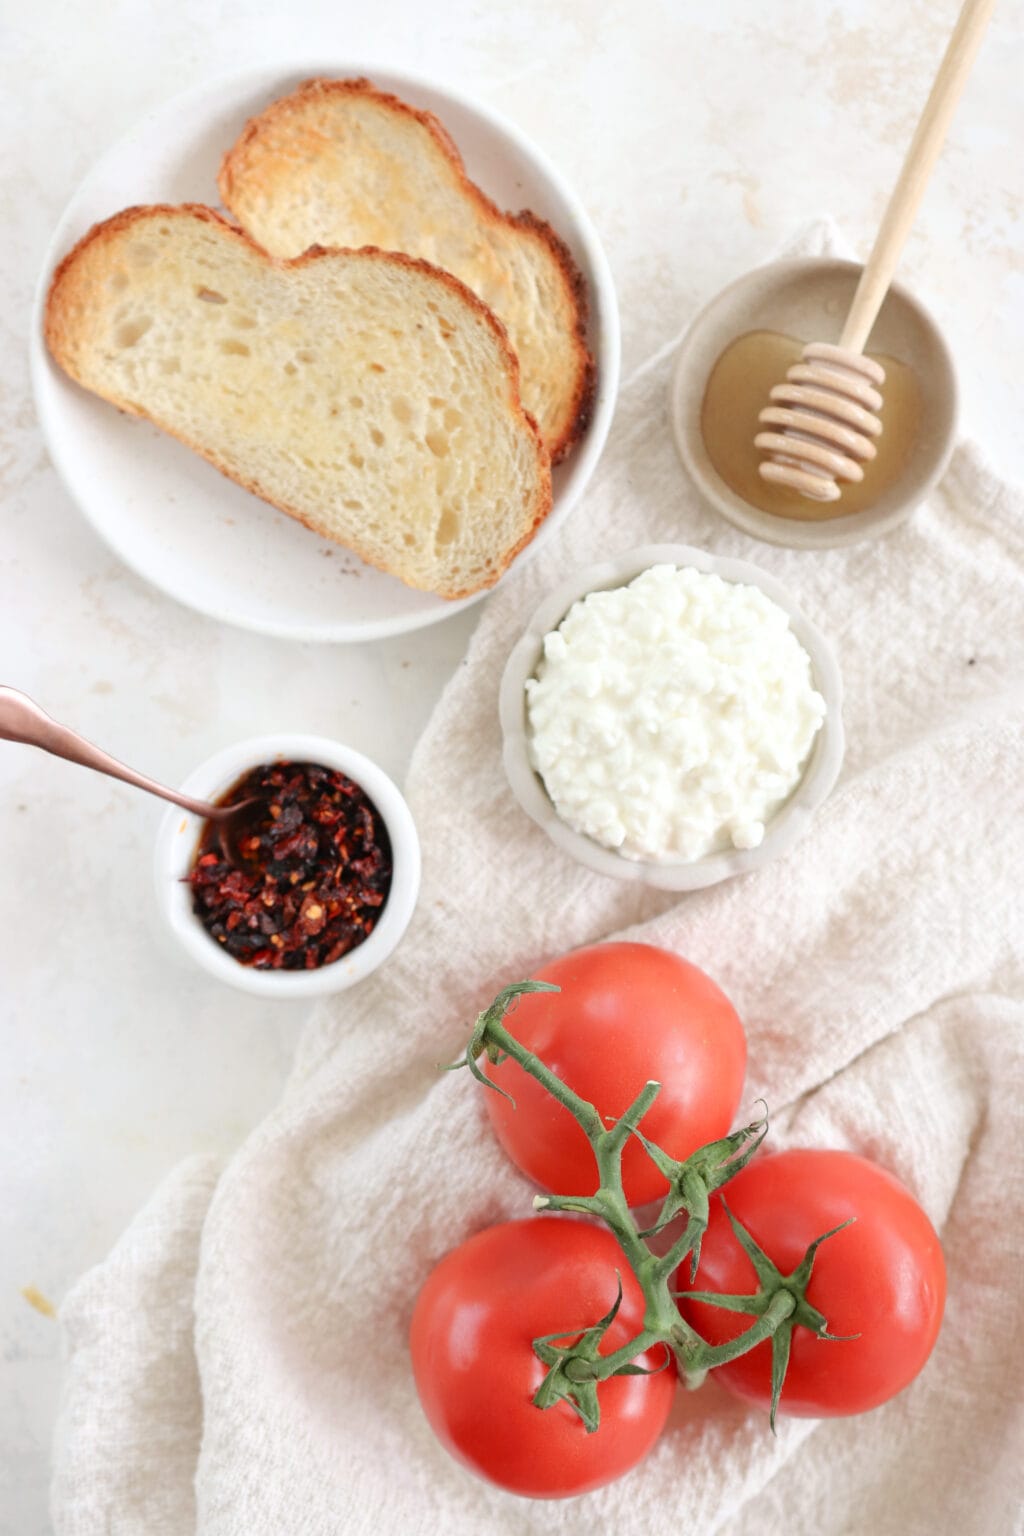 Ingredients for the recipe laid out include sourdough toast, honey, cottage cheese, chili crisp oil, and tomatoes